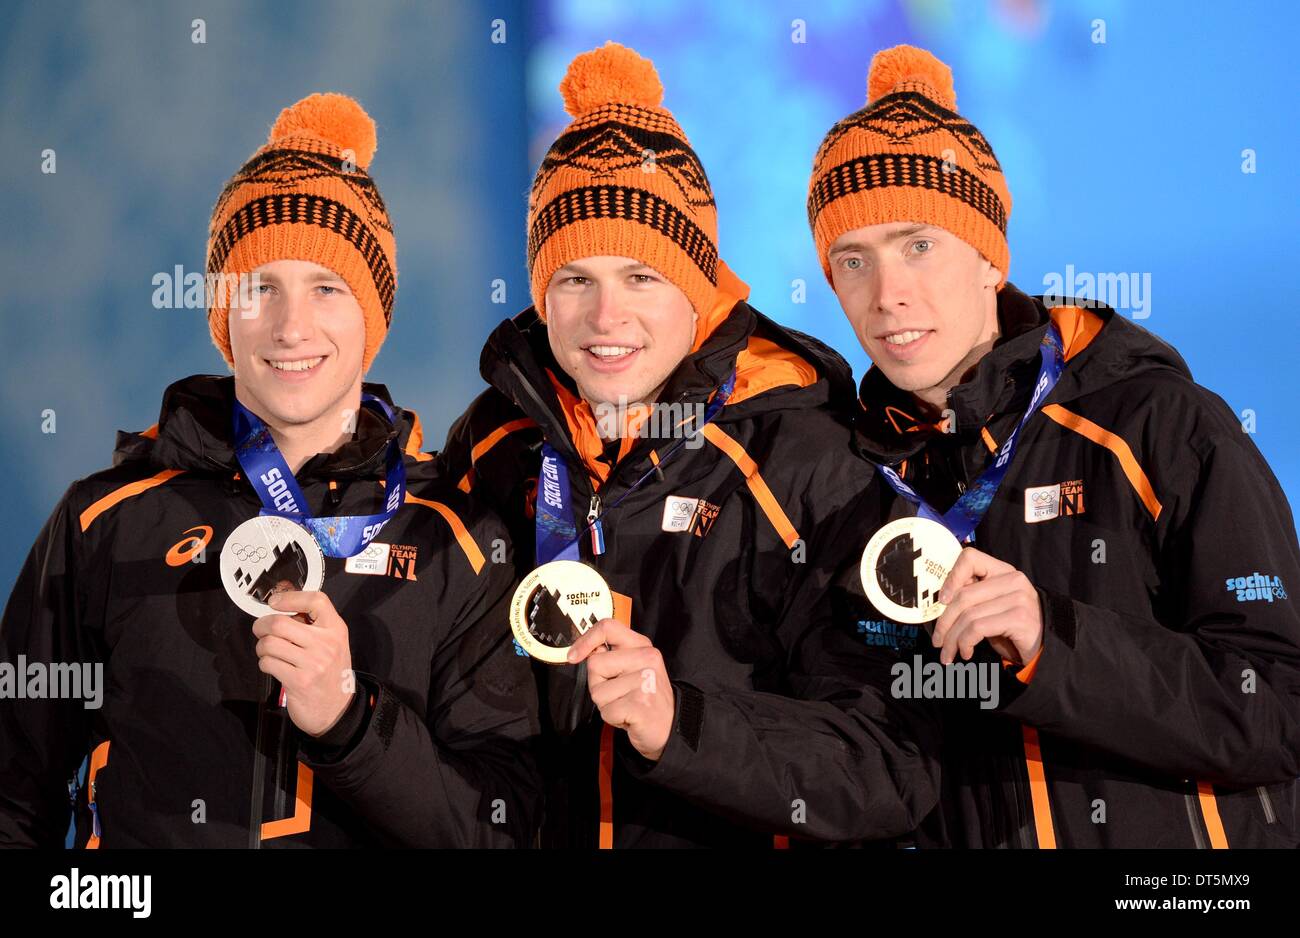 Sochi, Russia. 9th February 2014. A clean sweep for the Netherlands in the Mens 5,000m speed skating. (l to r)Jan BlokHuijsen (NED, silver), Sven Kramer (NED, gold) and Jorrit Bergsma (NED, bronze). Medal Ceremonies - Olympic Plaza - Sochi - Russia - 09/02/2014 Credit:  Sport In Pictures/Alamy Live News Stock Photo